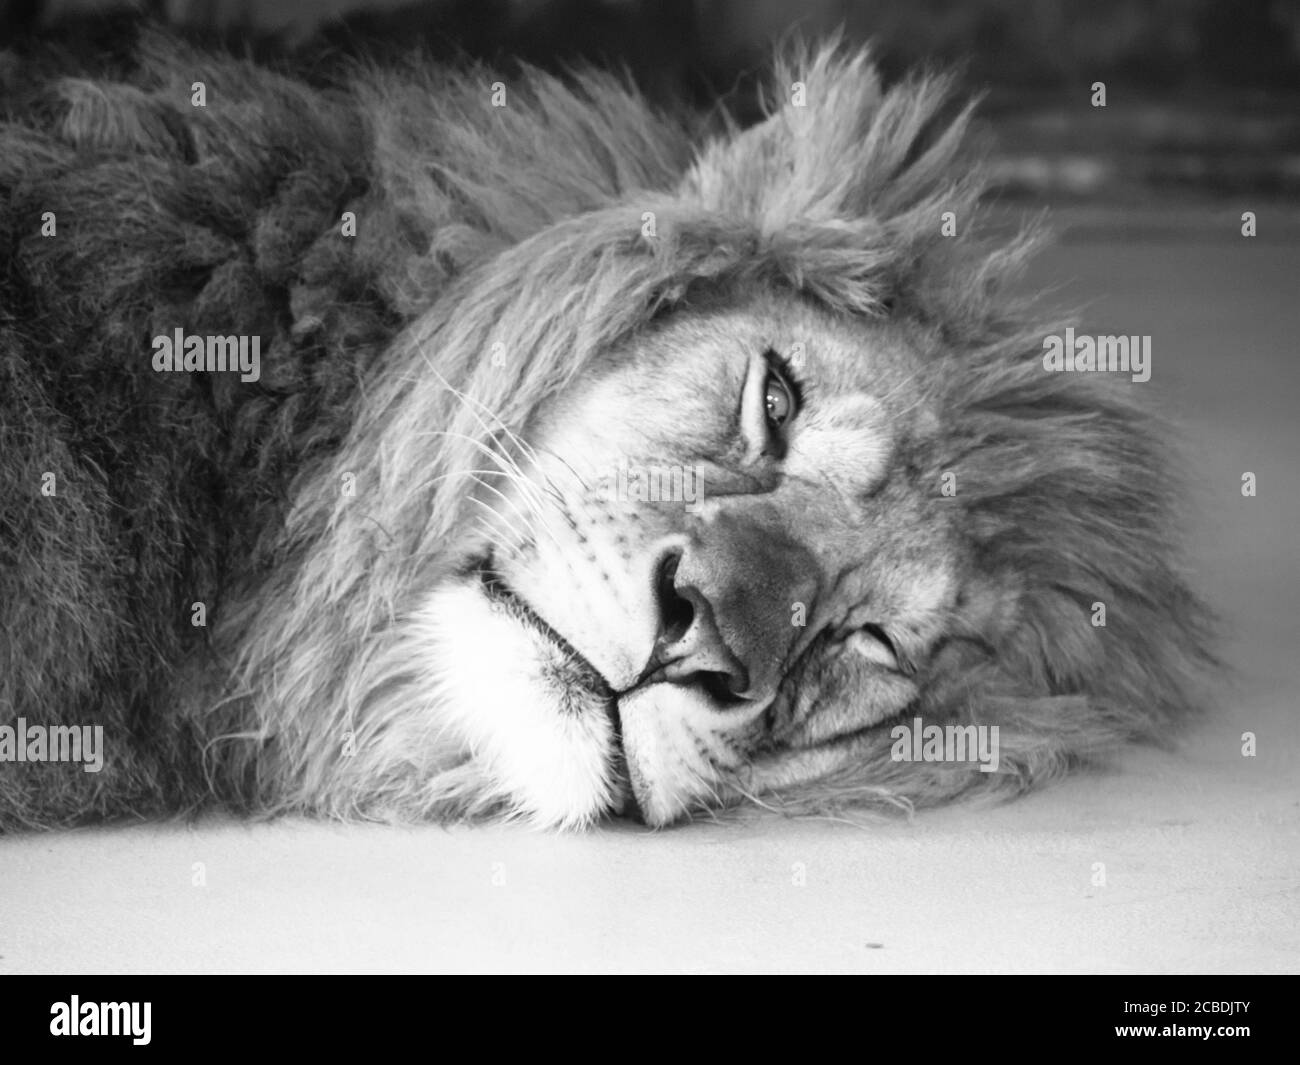 Tired male lion lying on a ground with one eye open. Black and white image. Stock Photo